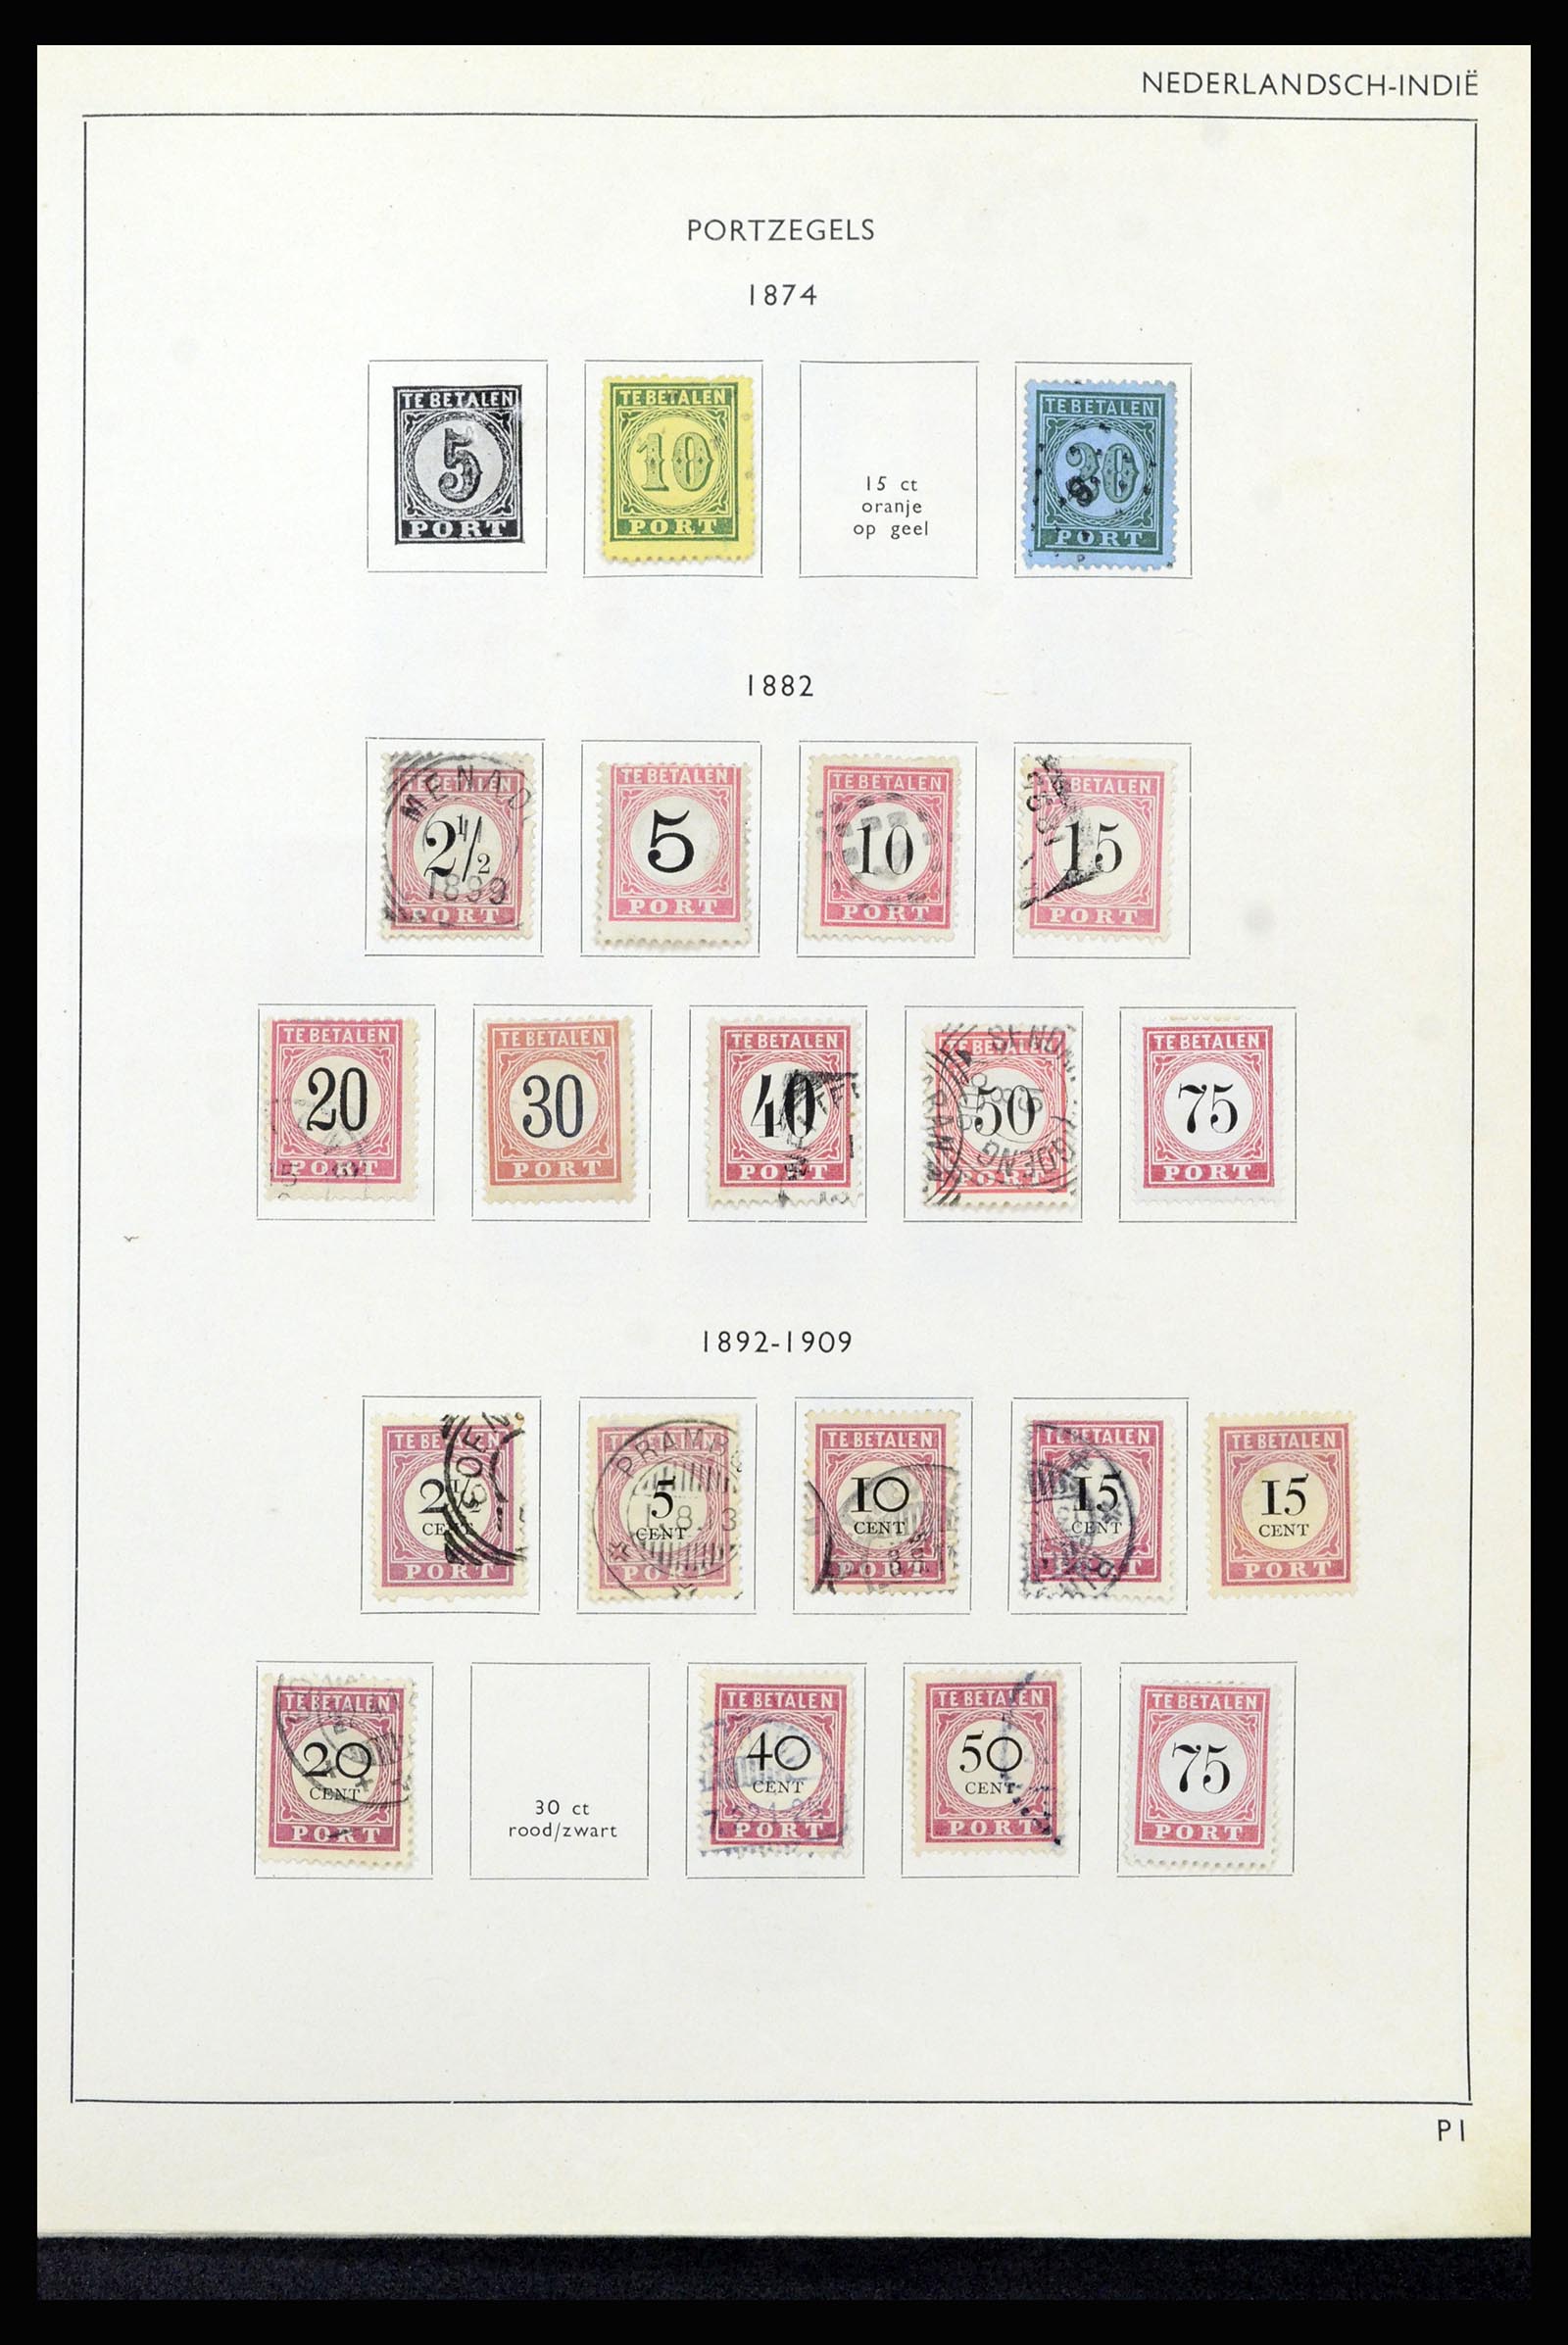 37217 033 - Stamp collection 37217 Dutch territories 1864-1975.